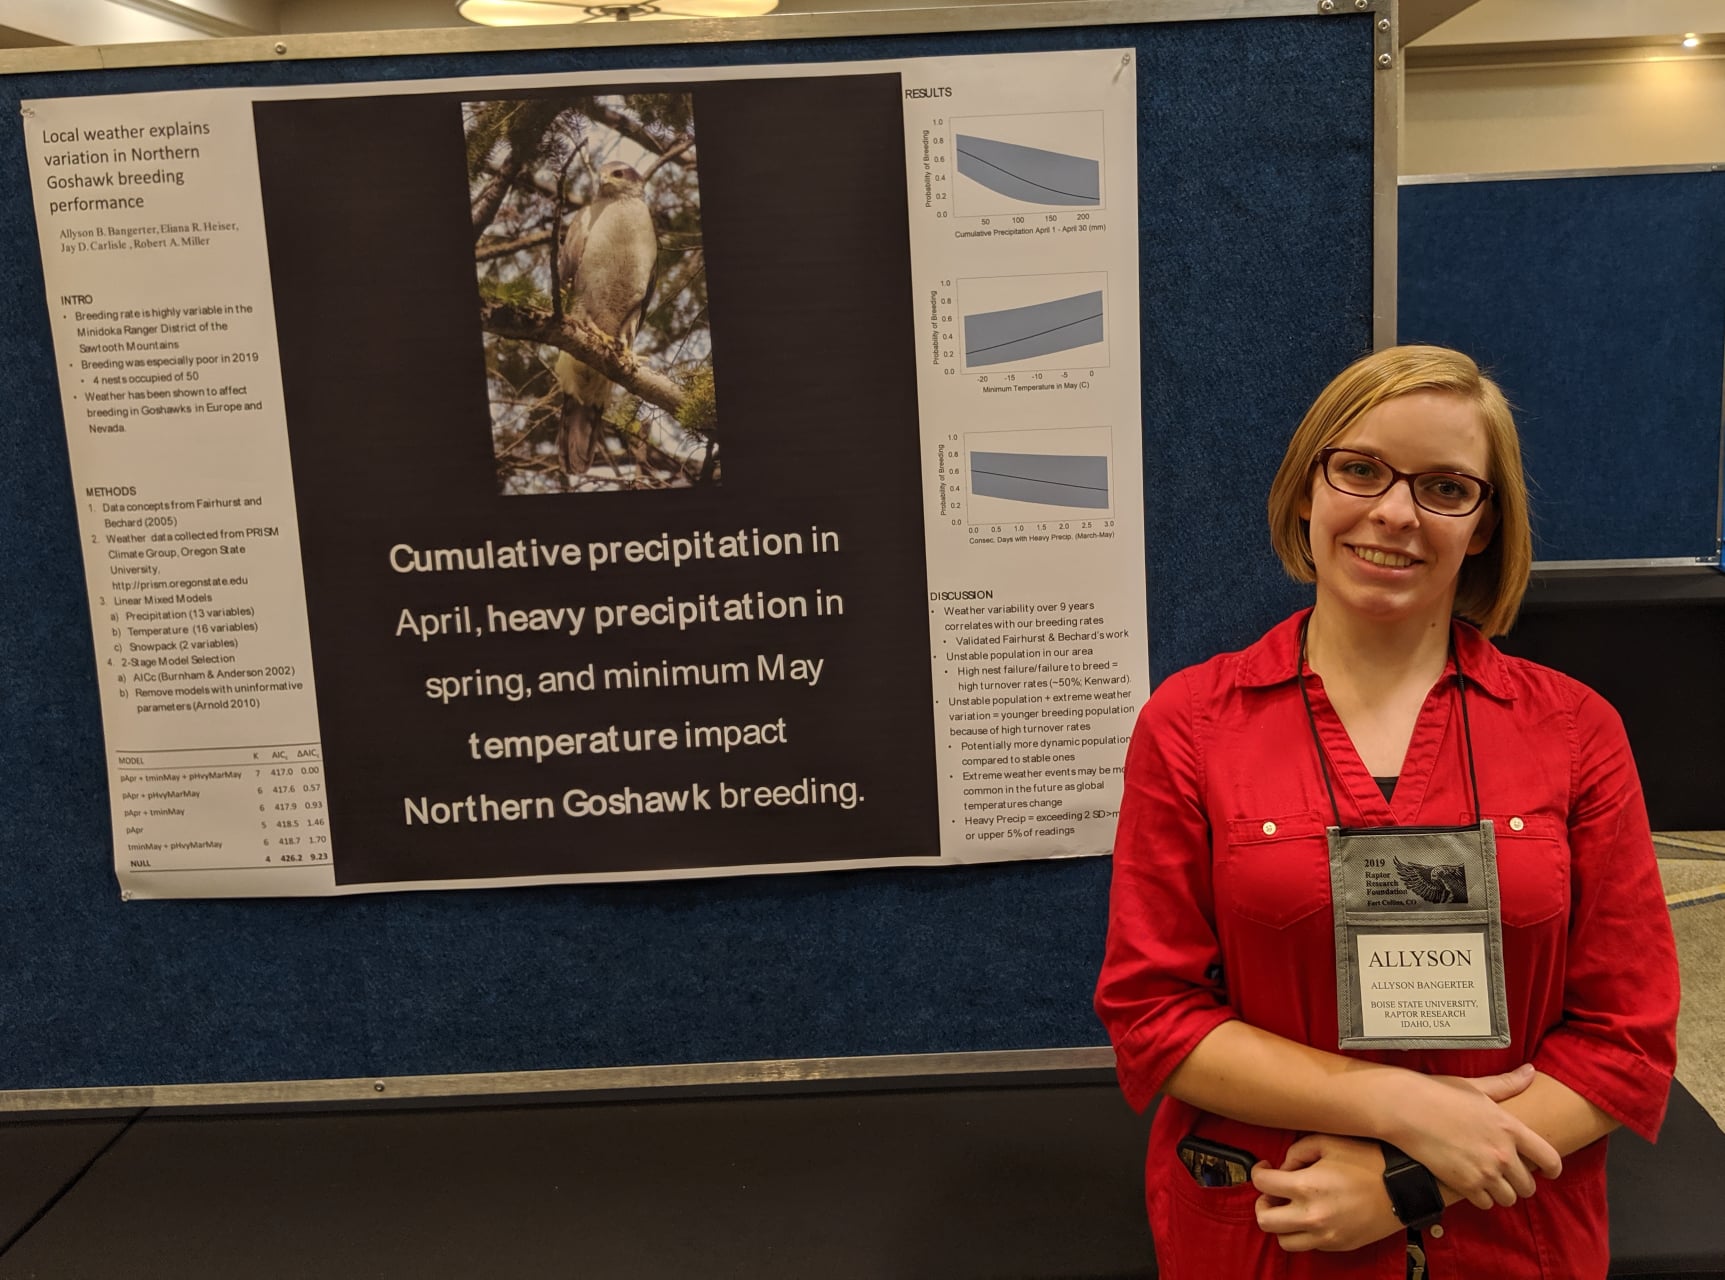 a student stands next to her poster which reads "Cumulative precipitation in April, heavy precipitation in spring, and minimum May temperature impact Northern Goshawk breeding"